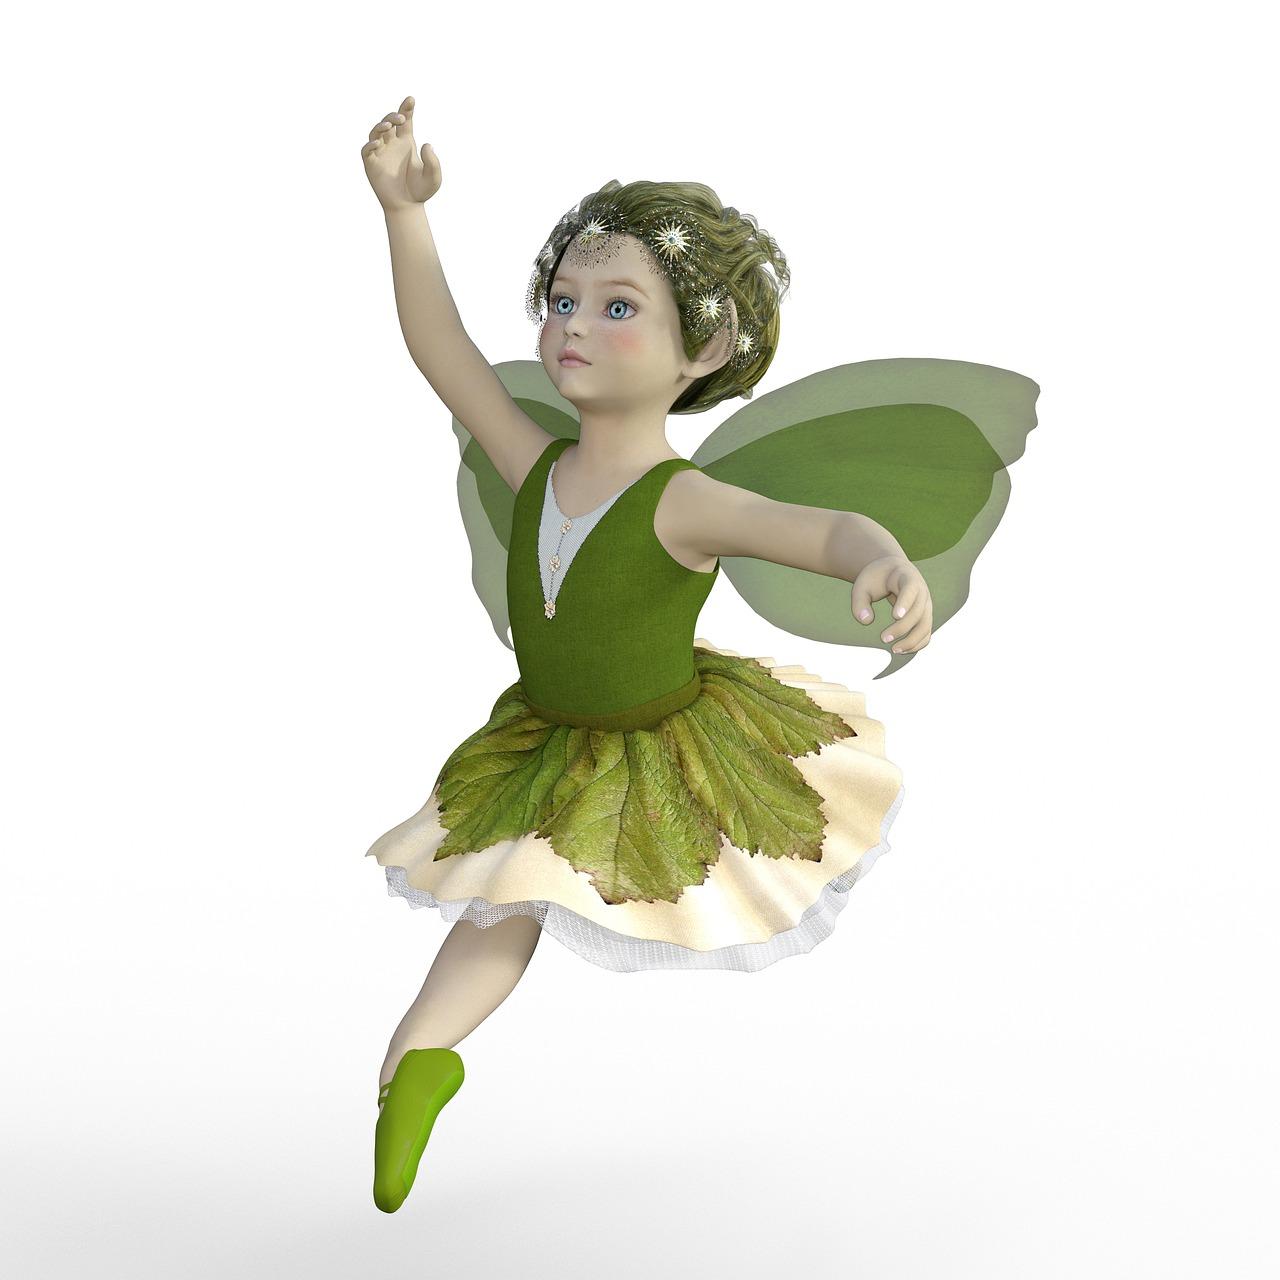  How To Make A Tinkerbell Costume 